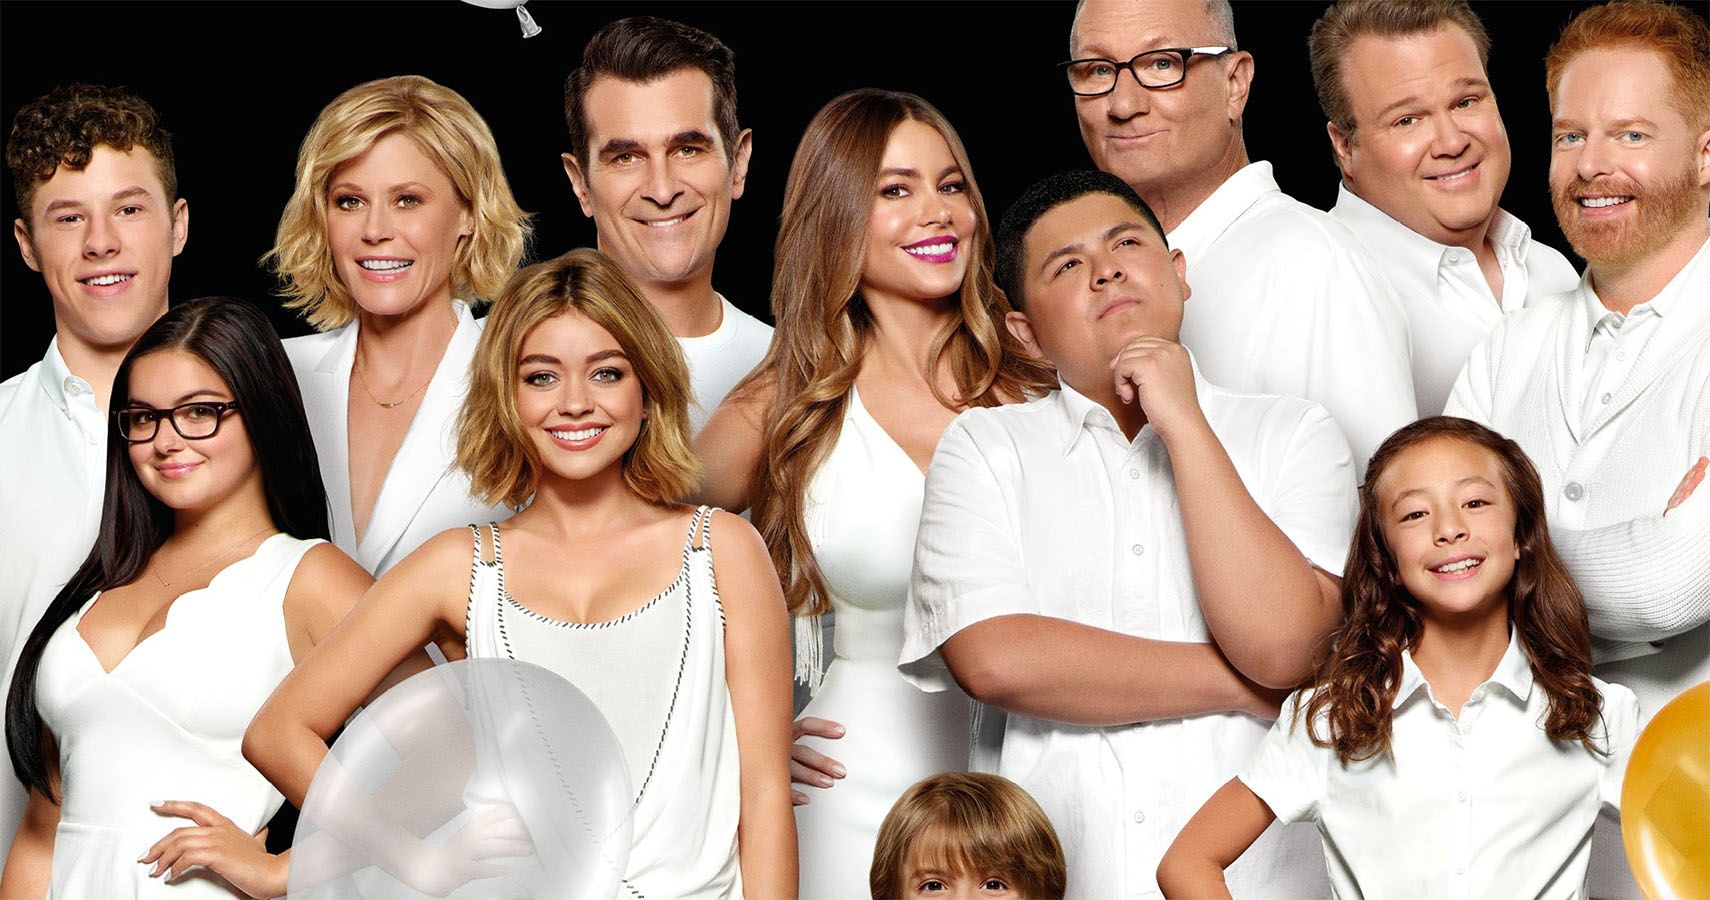 Myers-Briggs® Personality Types Of Modern Family Characters